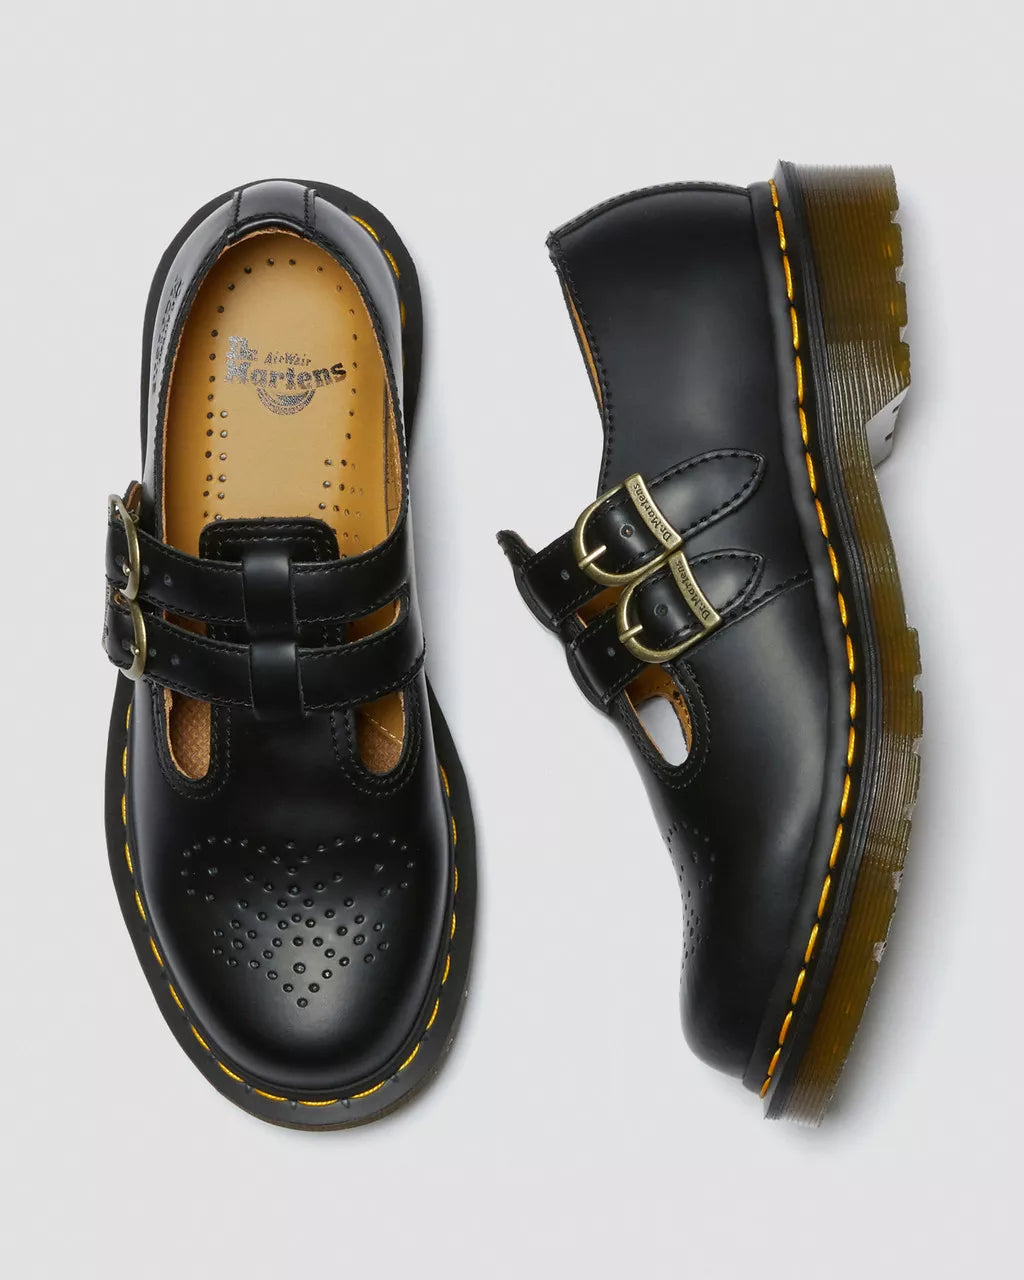 SHOES - DR.MARTENS - 8065 Mary Jane Smooth Leather - PLENTY